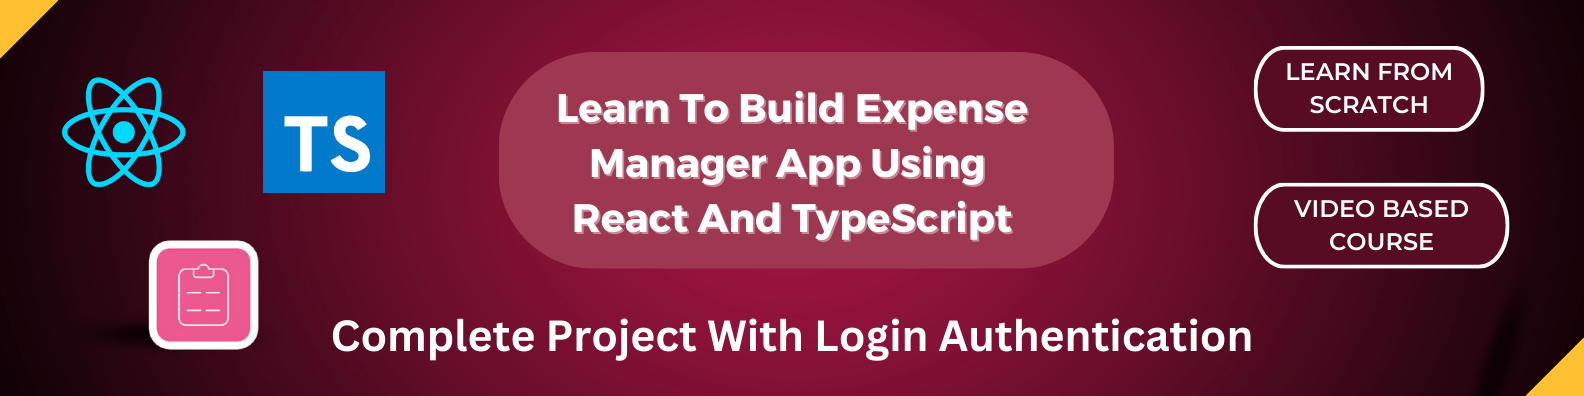 Build Expense Manager App Using React And TypeScript